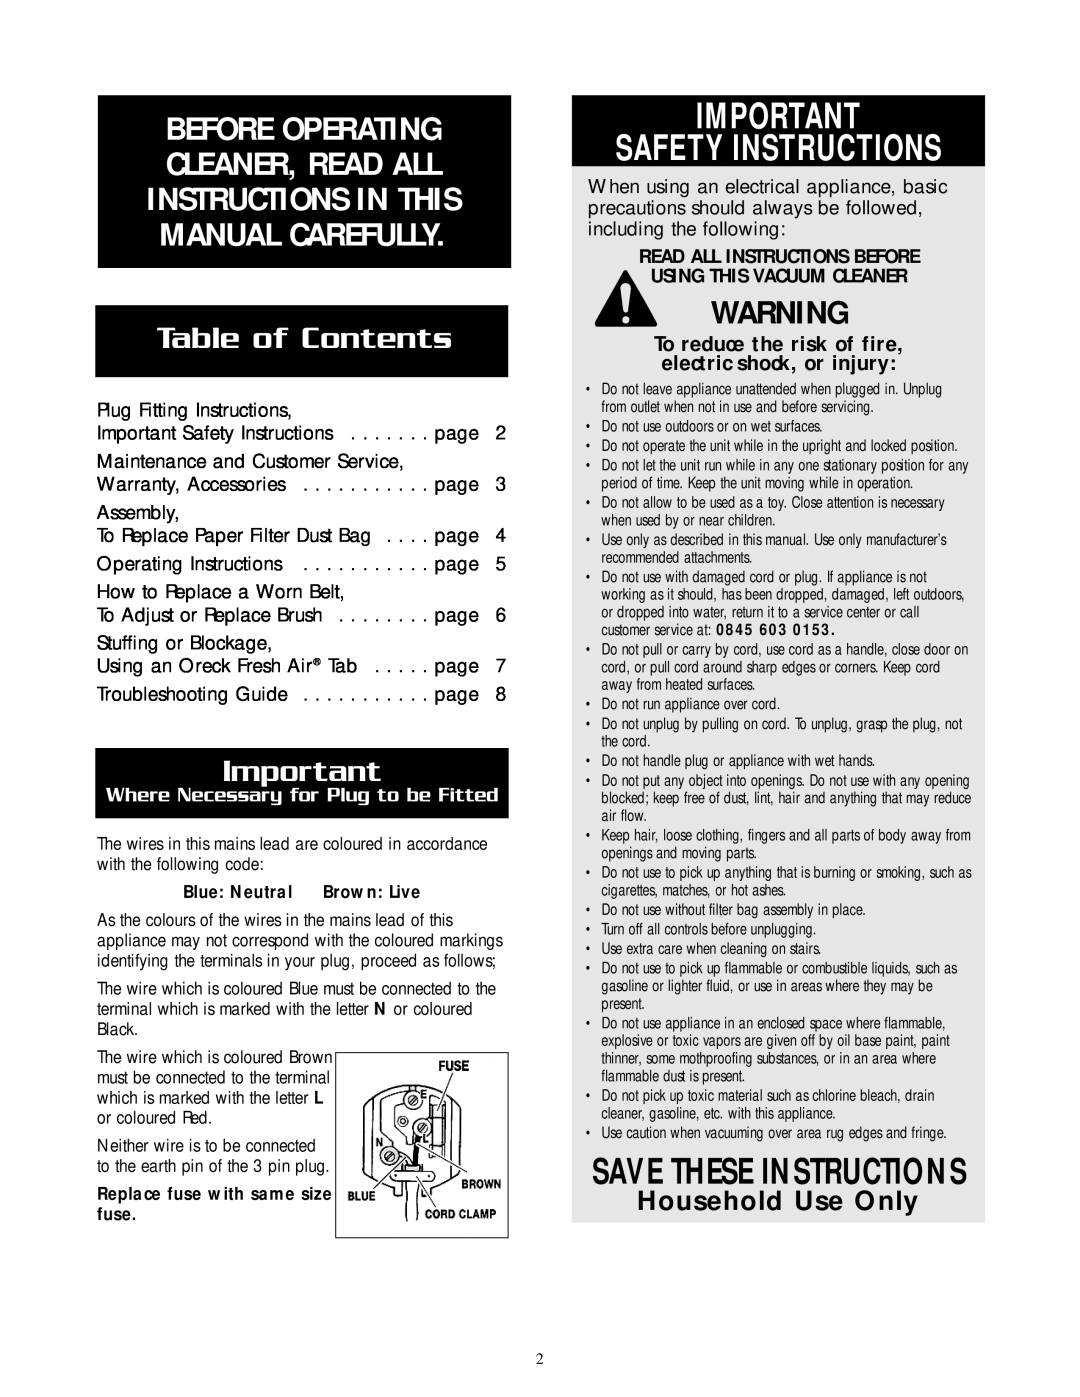 Oreck U2505RH warranty Safety Instructions, Save These Instructions, Table of Contents, Household Use Only 